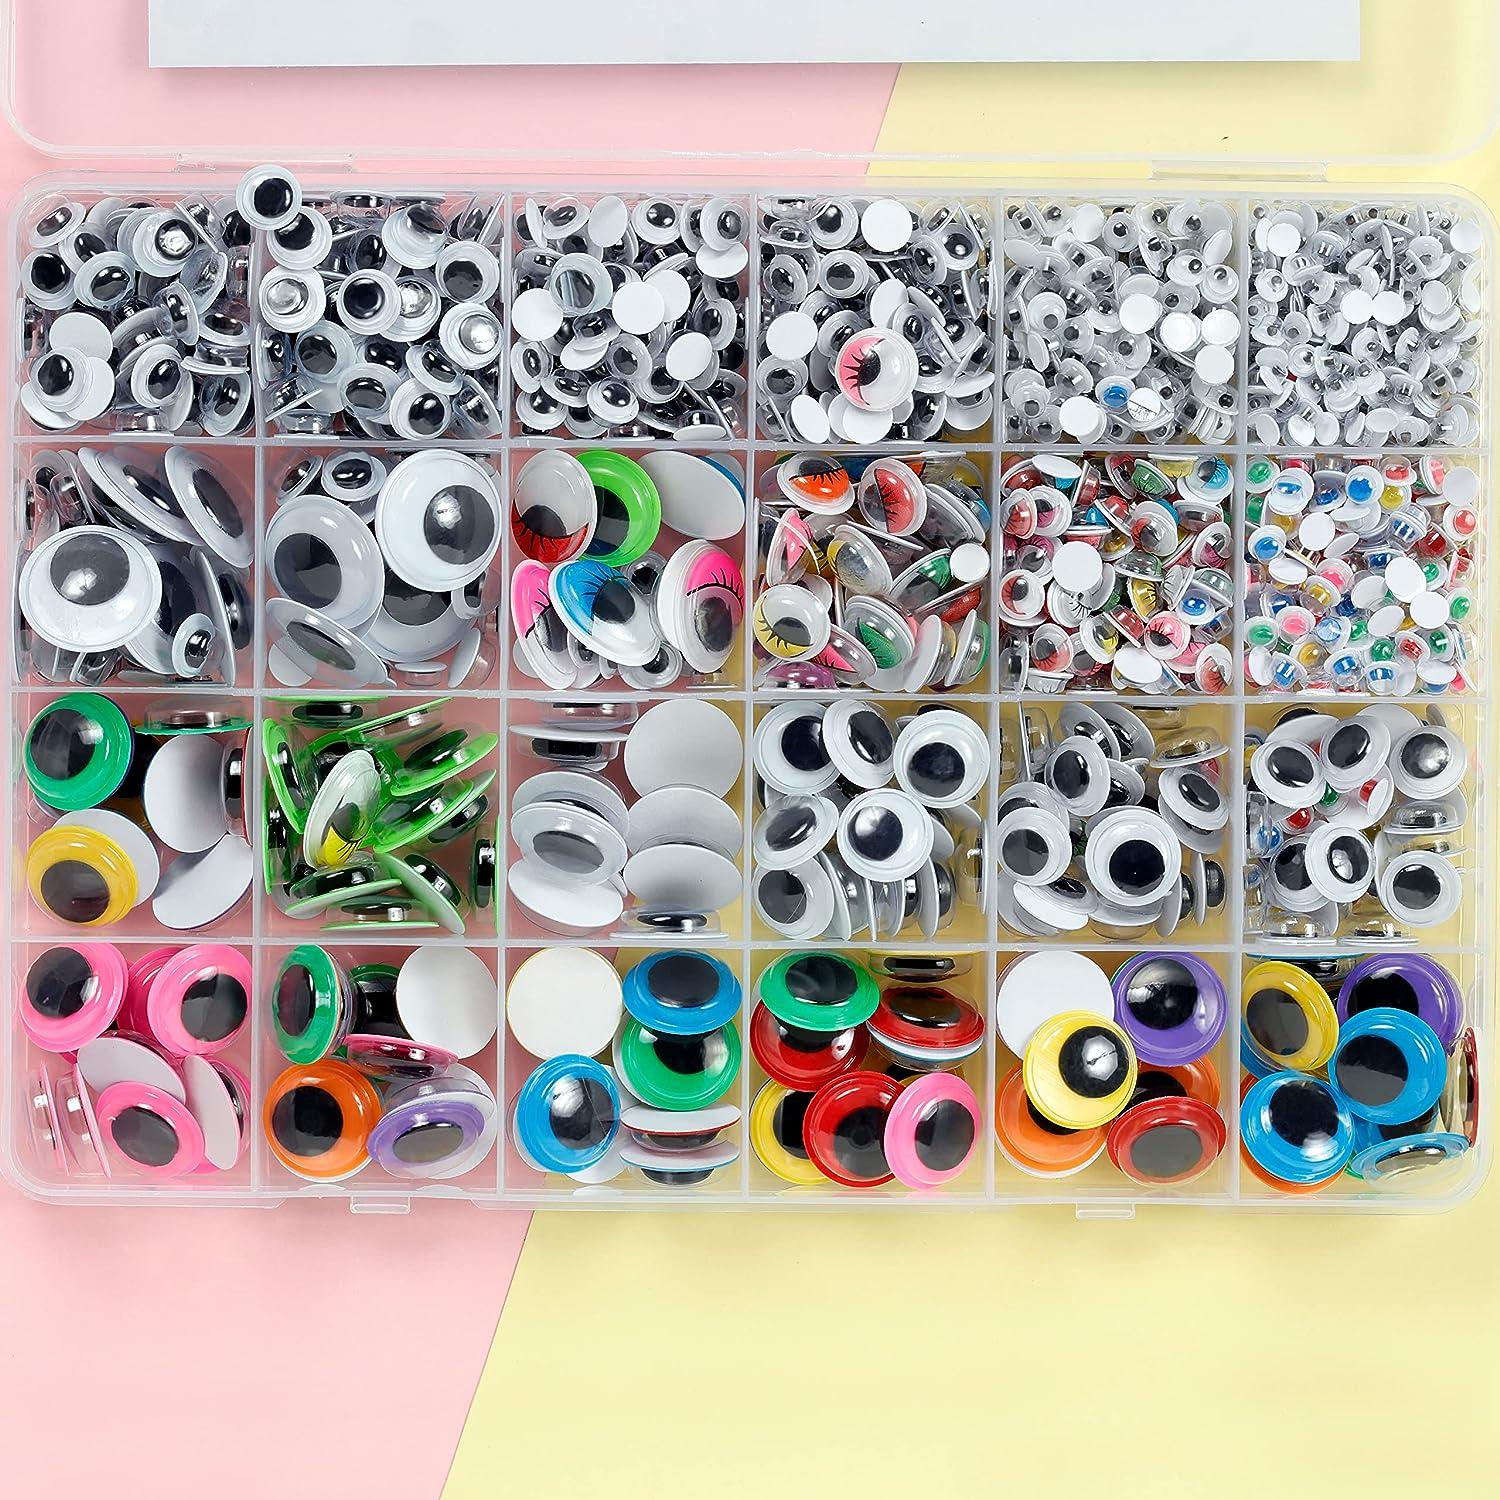 Incraftables Googly Eyes 1680 pcs (Self Adhesive) Set. Best Small